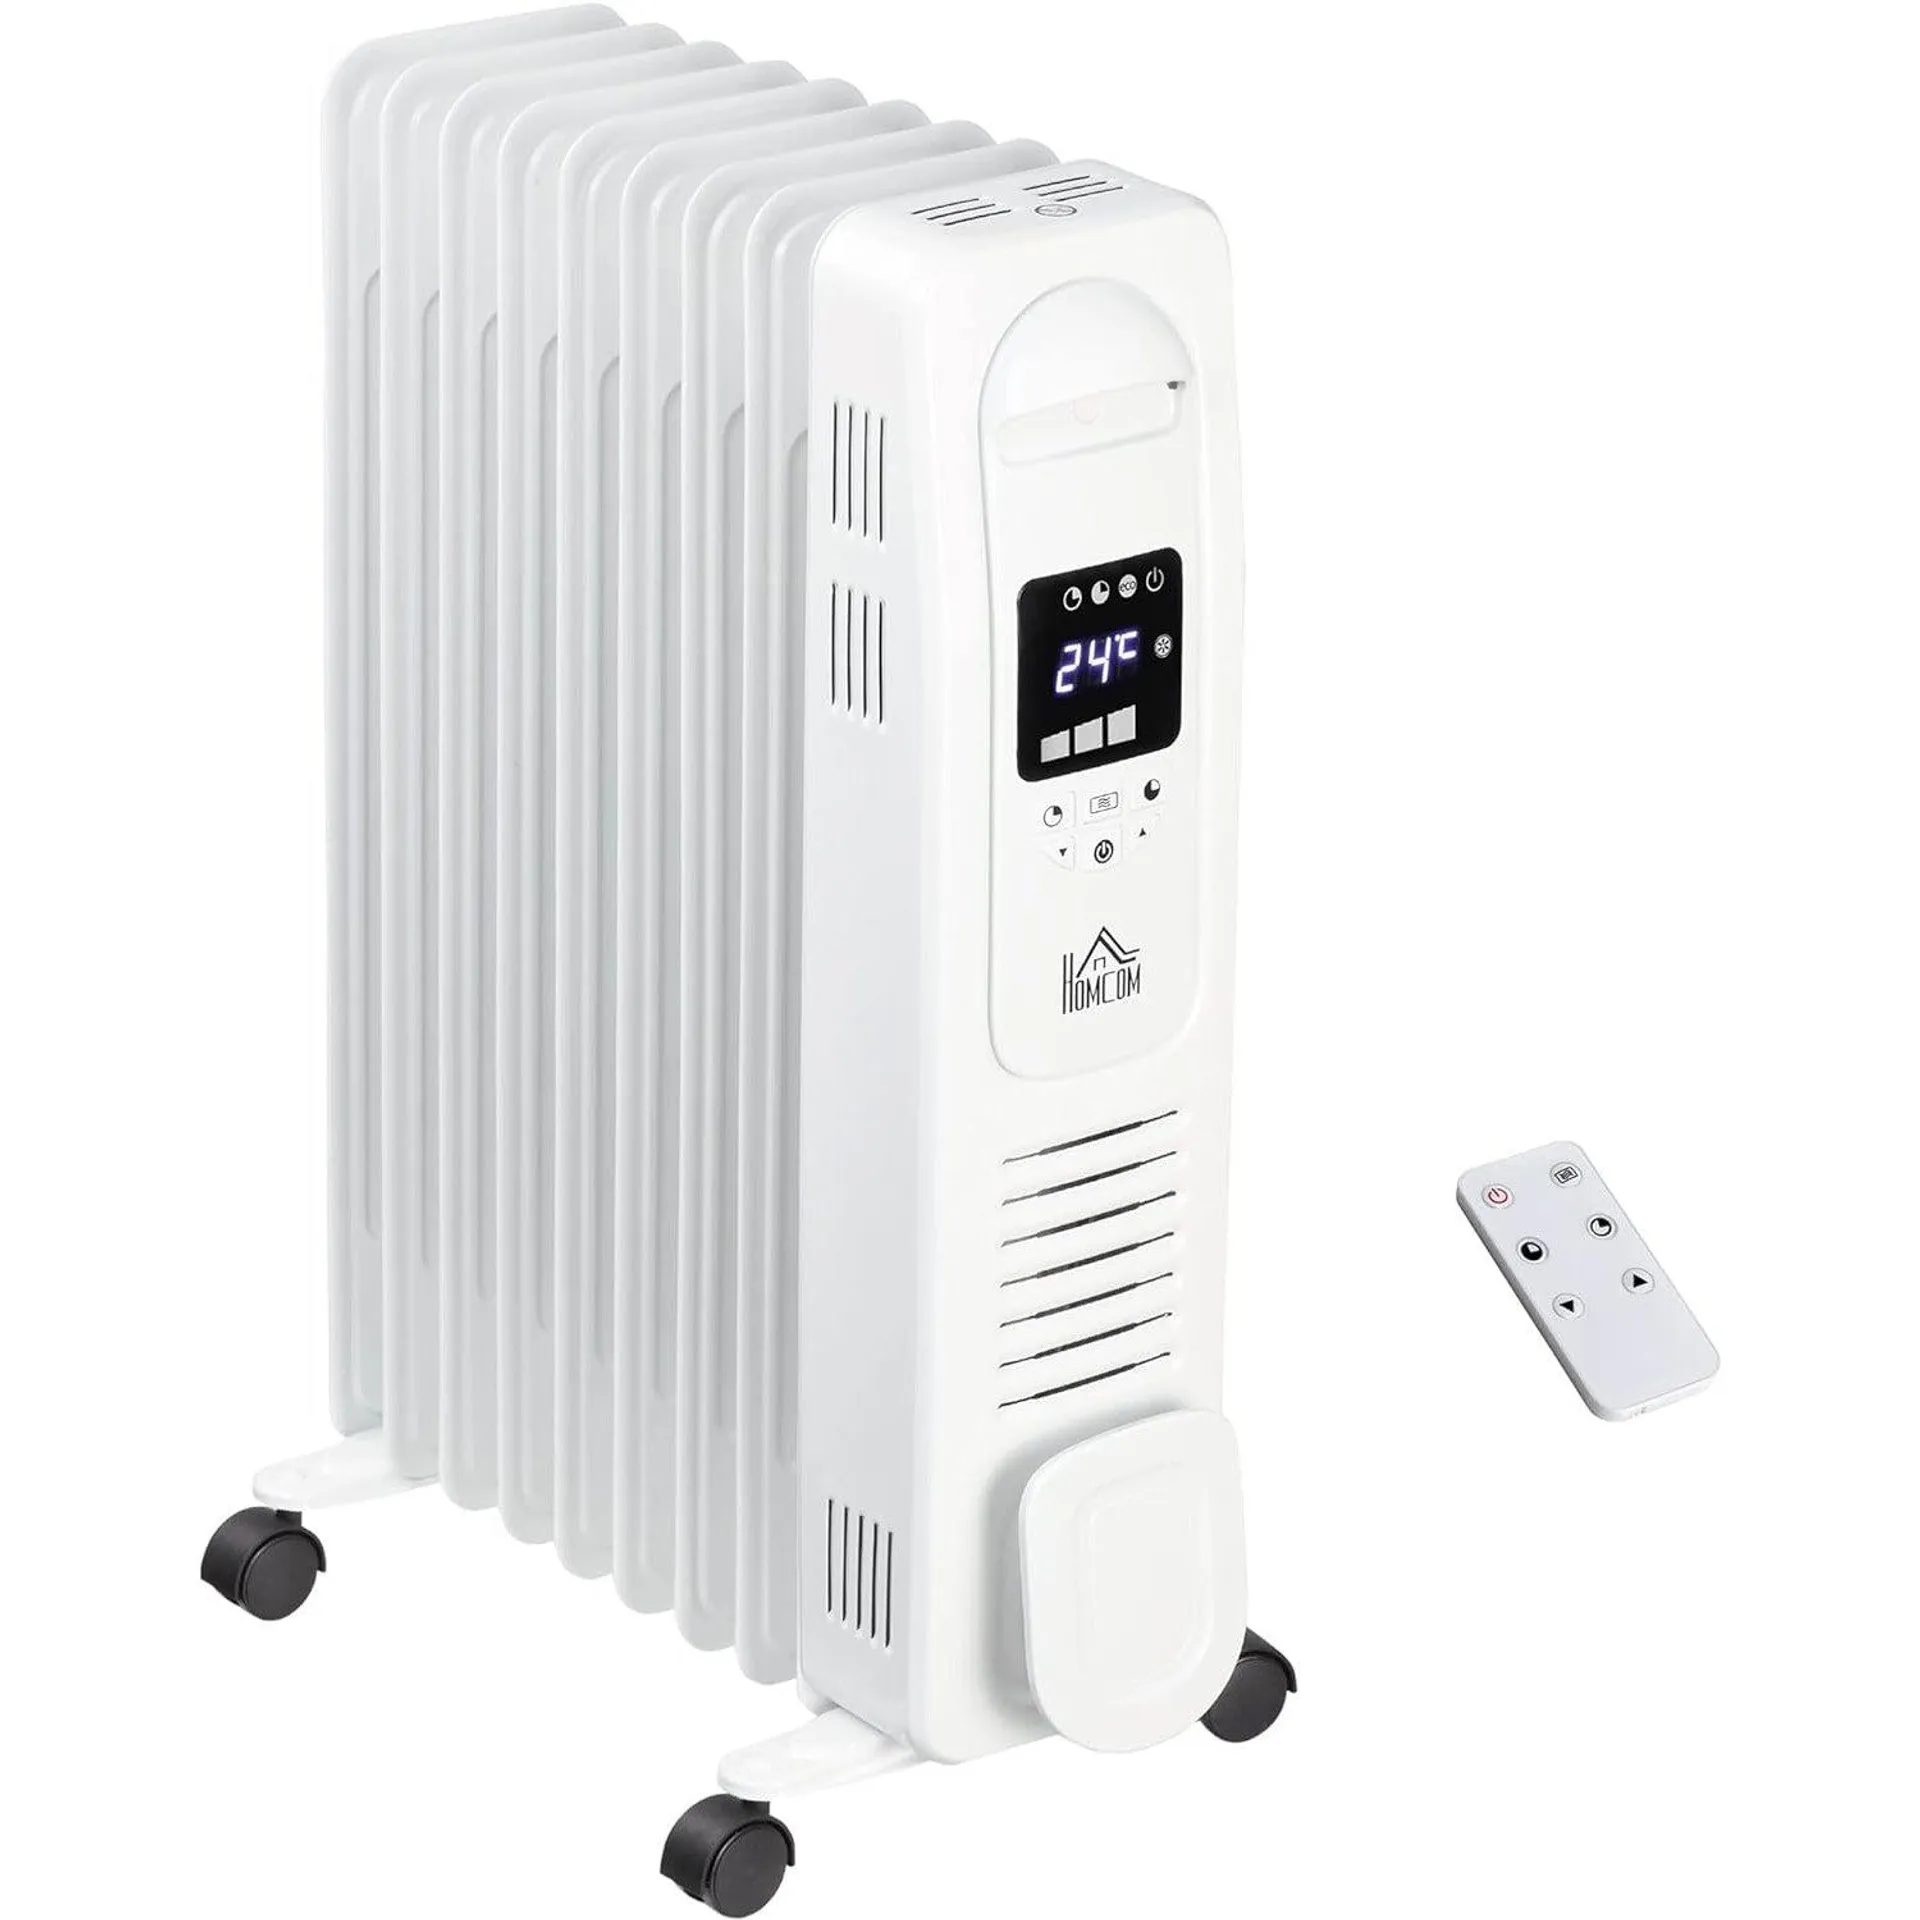 Maplin Plus 2180W Digital 9 Fin Portable Electric Oil Filled Radiator with LED Display, Timer, 3 Heat Settings, Safety Cut-Off & Remote Control